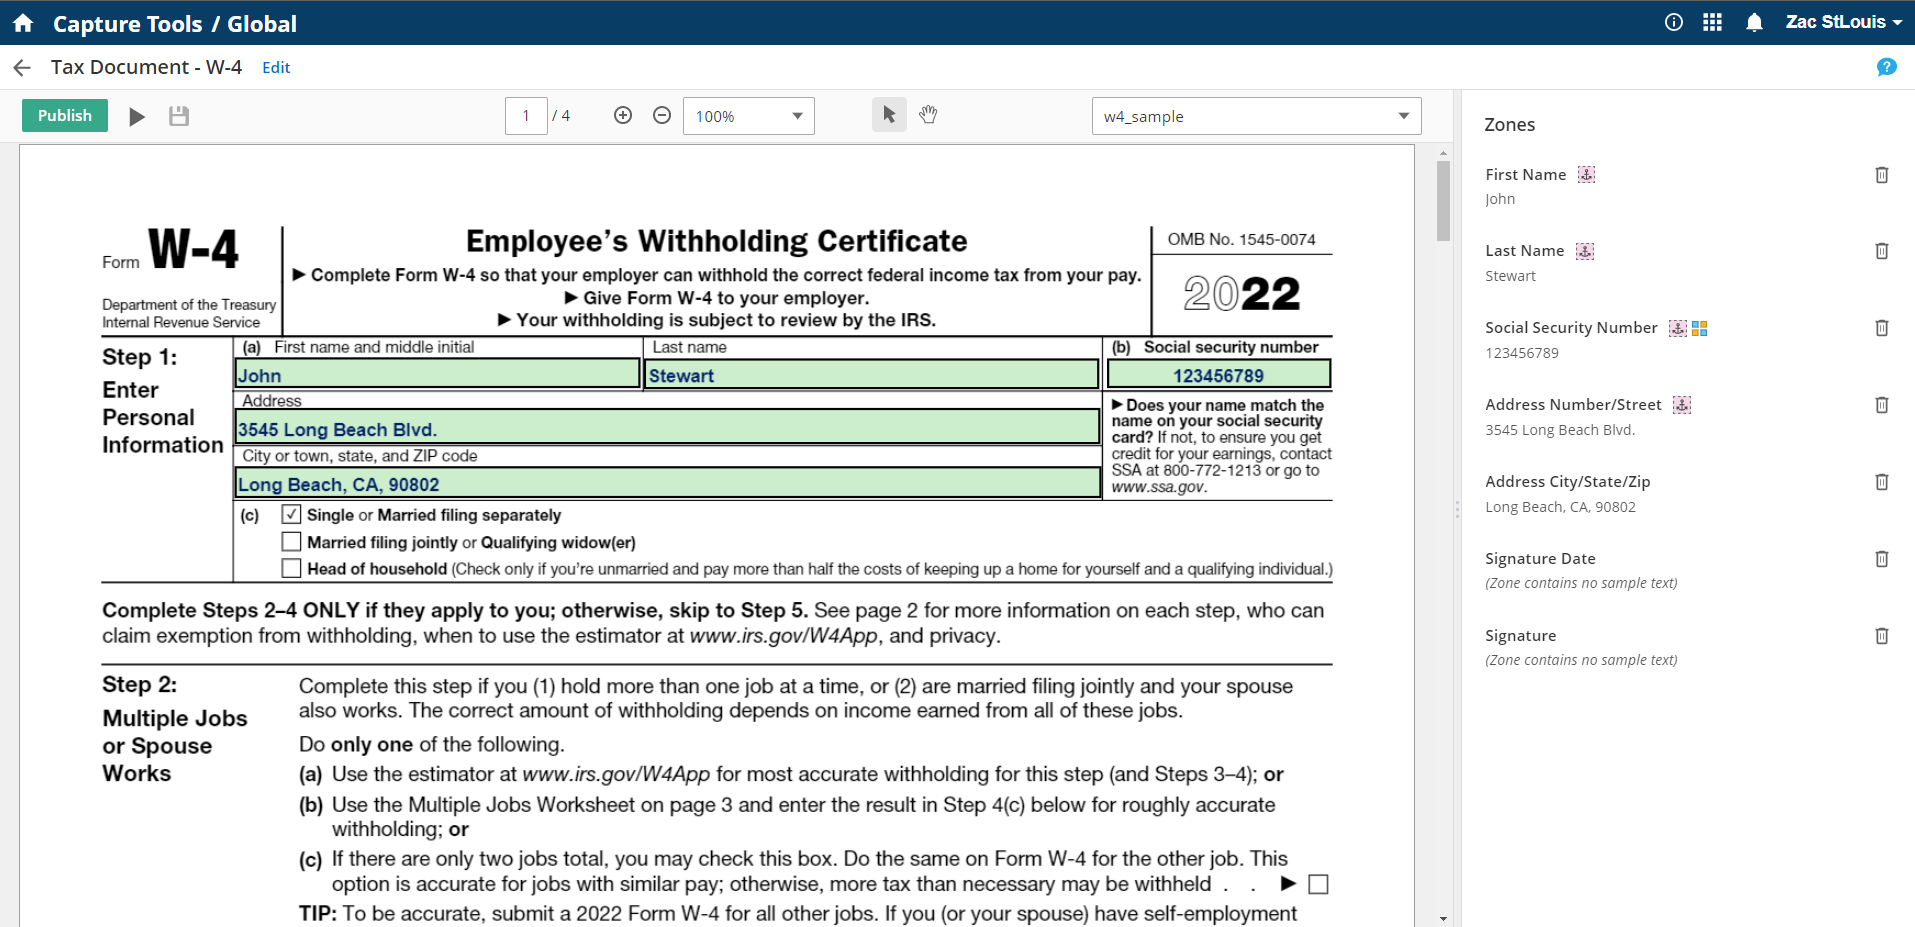 Capture Profiles for W-9, W-4 and I-9 Forms-Other